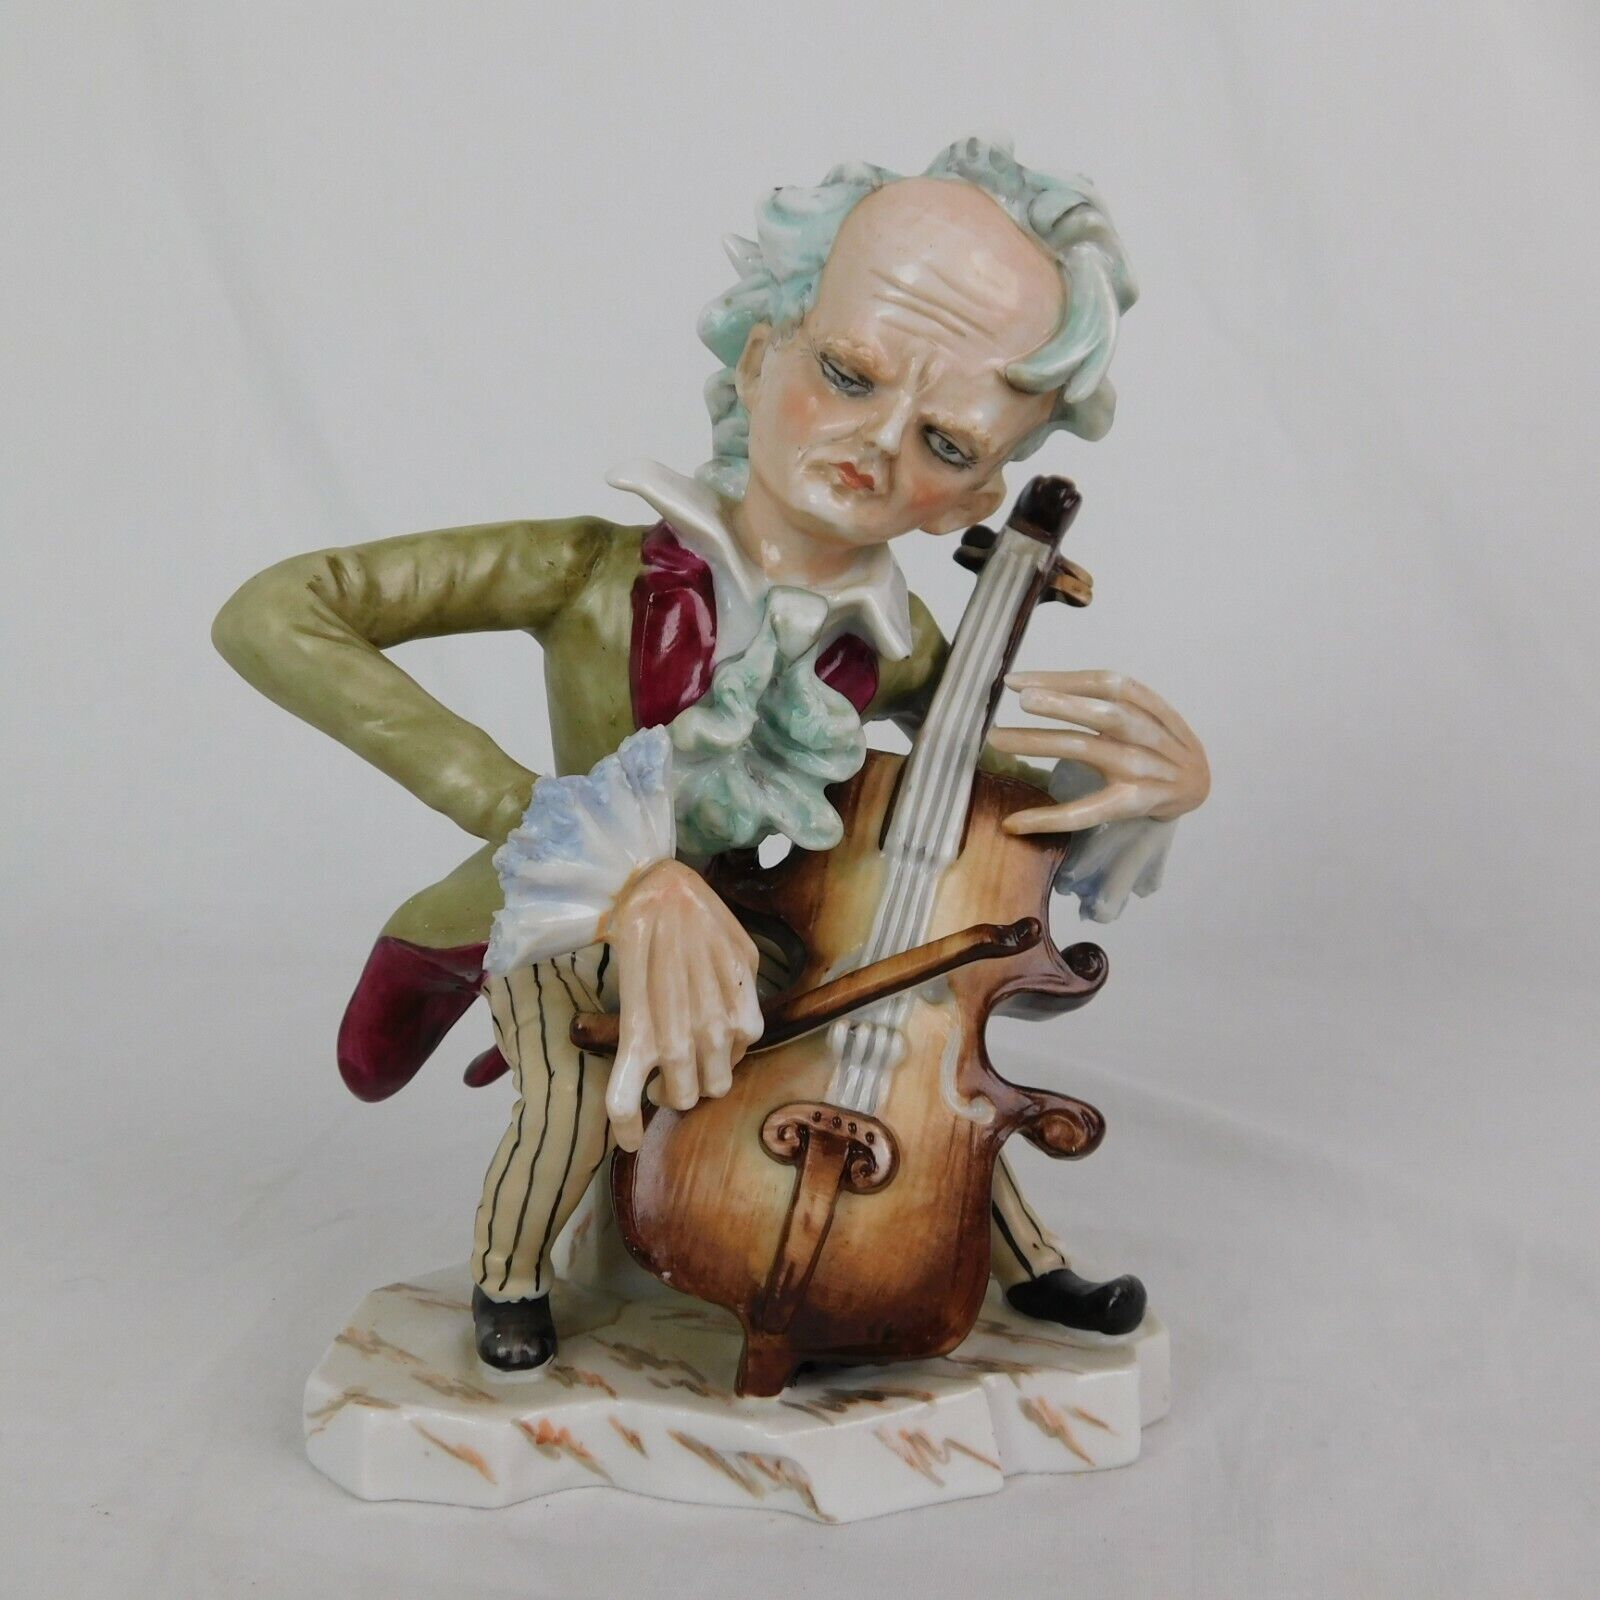 Primary image for Vtg Cello Player Figurine Man Playing Instrument Lipper & Mann Cellist Musician